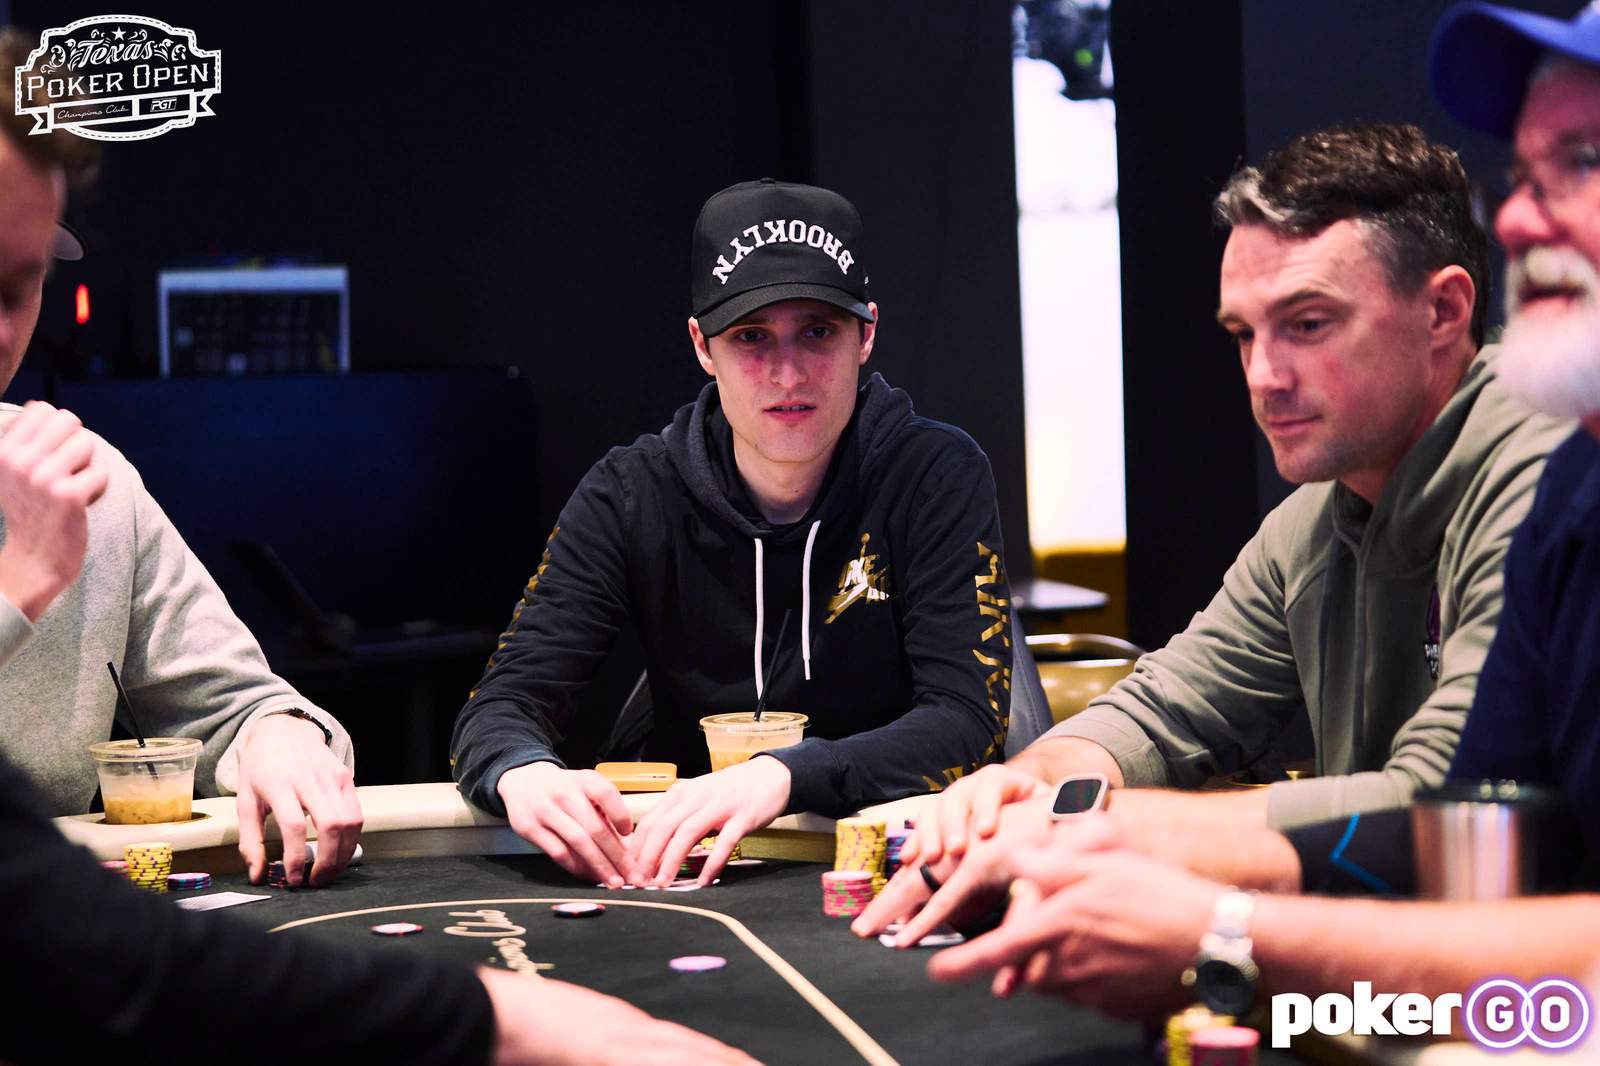 Mzareulov and Becker Lead 11 Survivors From Day 1B of Texas Poker Open $3,300 Main Event